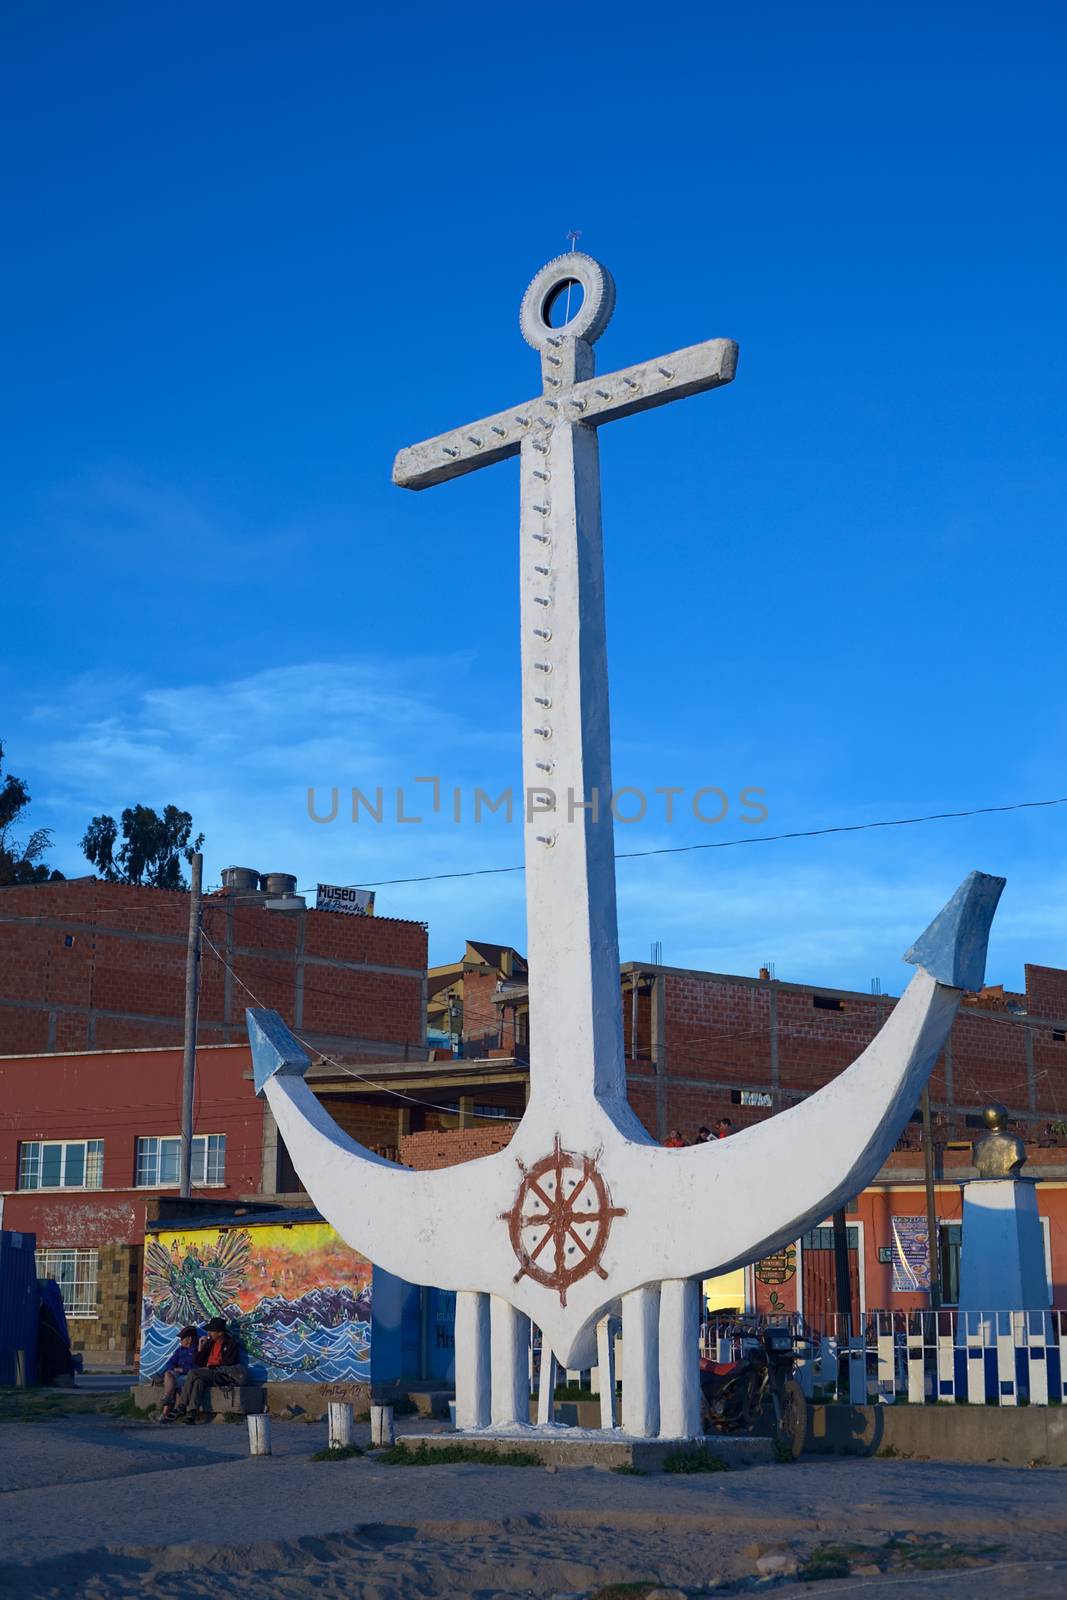 COPACABANA, BOLIVIA - OCTOBER 17, 2014: Anchor lit by the setting sun on the shore of Lake Titicaca in the harbor of the small tourist town on October 17, 2014 in Copacabana, Bolivia. Copacabana is the starting point for tours and transportation to the Isla del Sol (Sun Island).